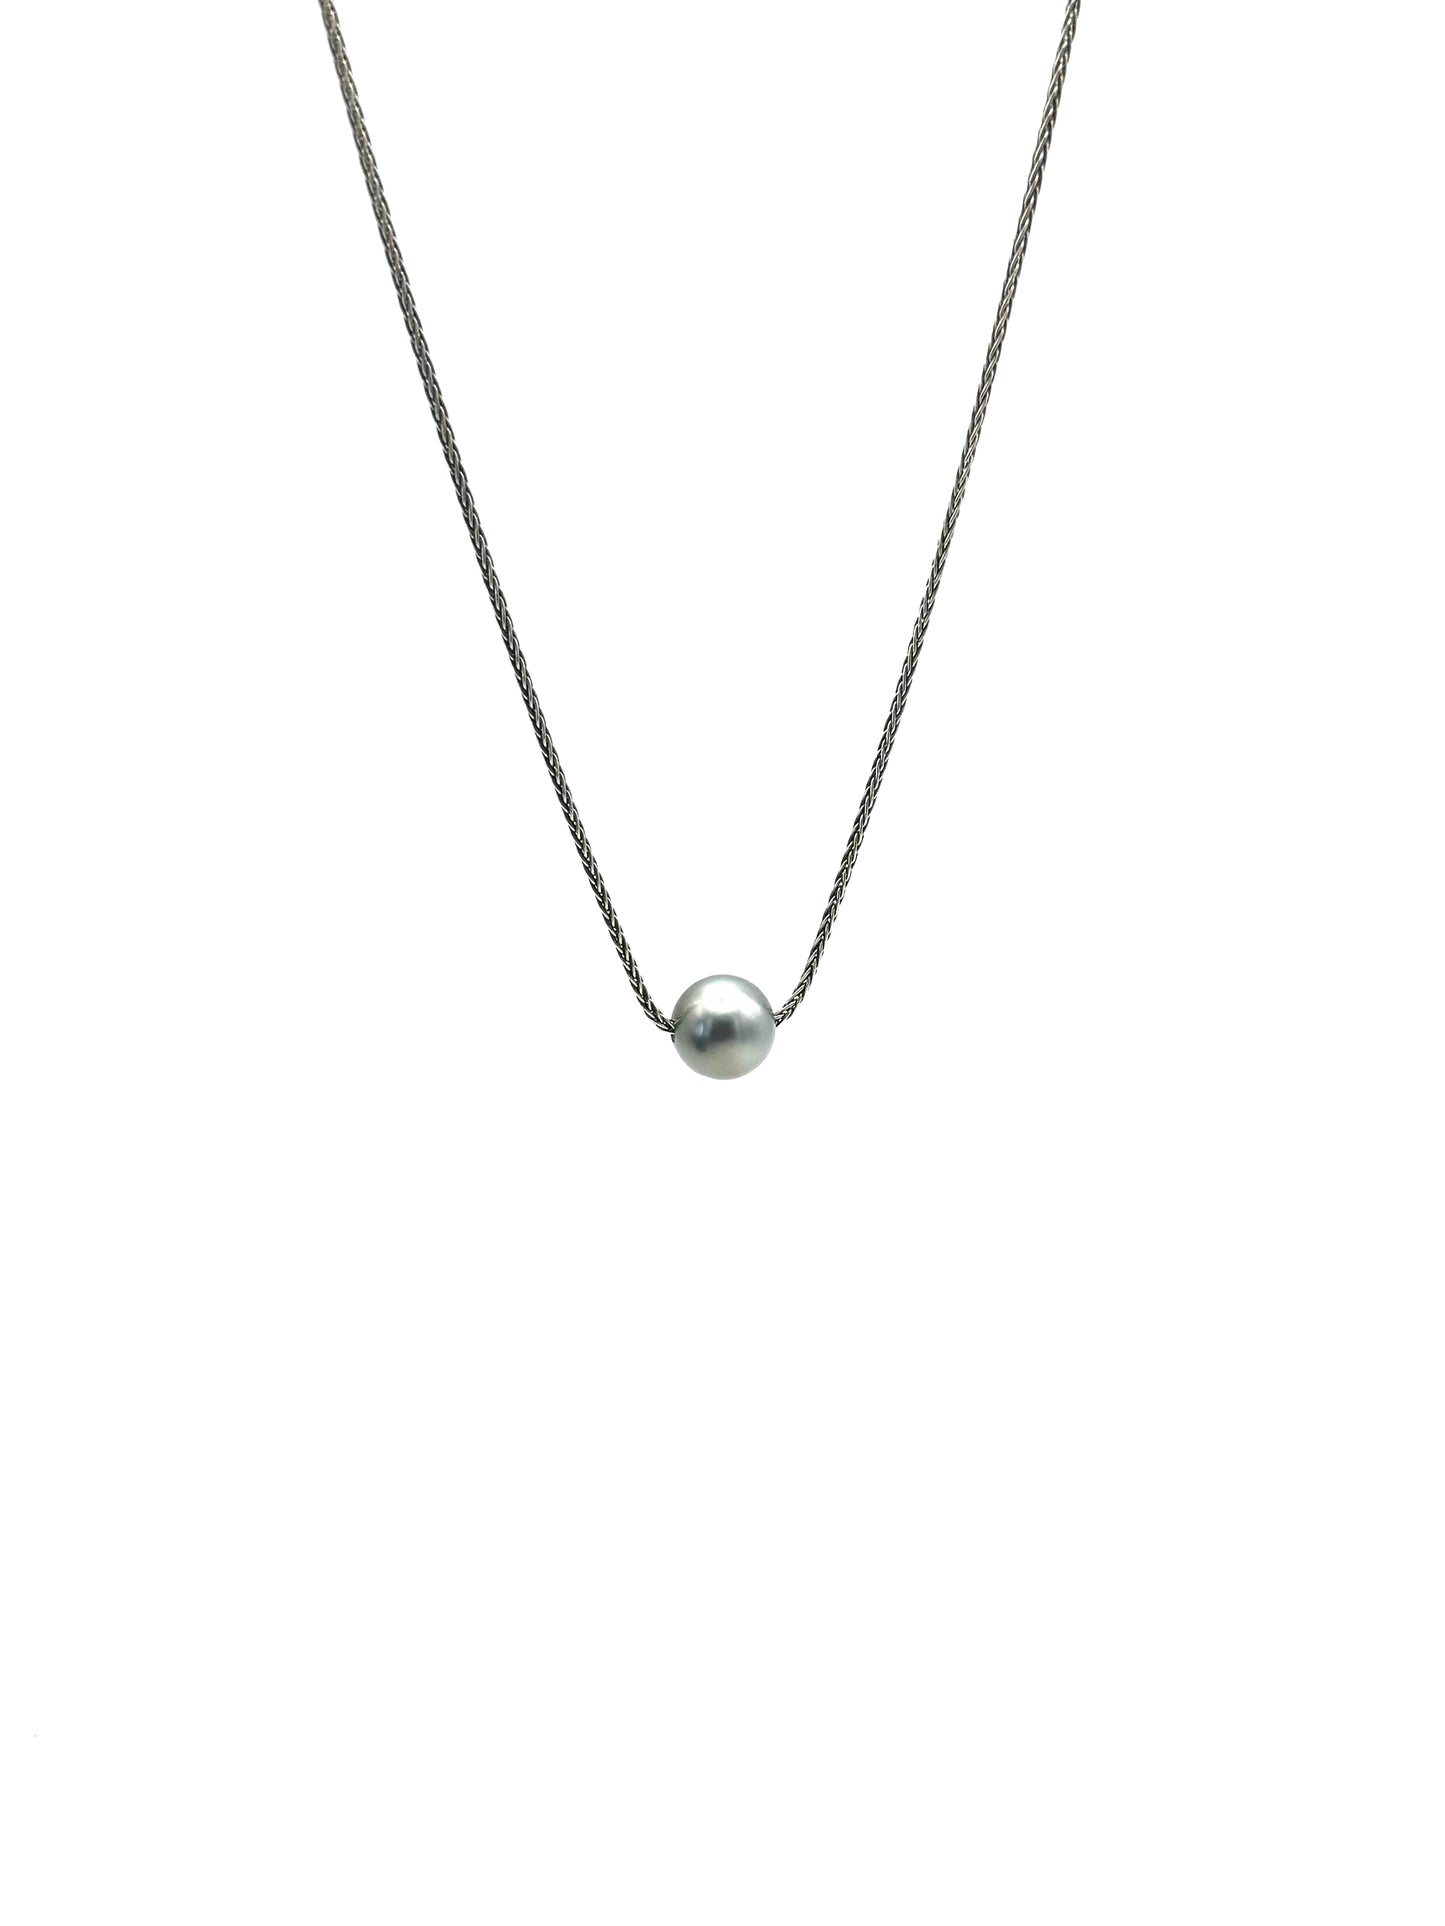 13.6mm AA+ Silver Tone Tahitian Pearl on Sterling Silver Chain